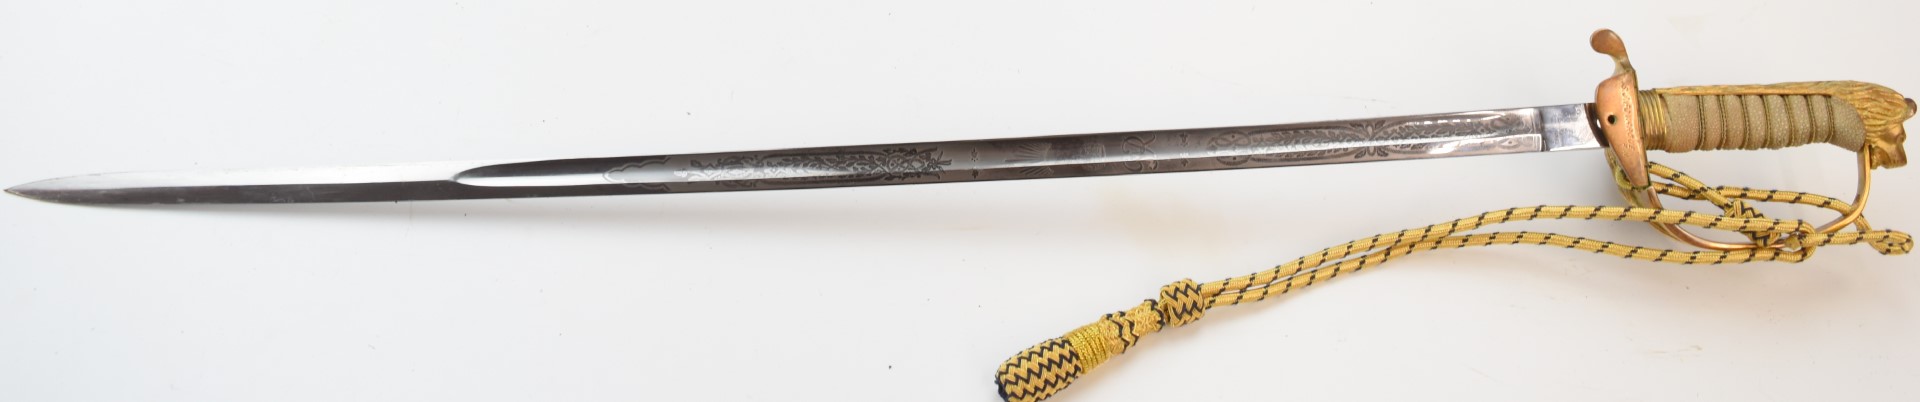 Royal Navy officer's 1827 pattern dress sword with folding guard, lion head pommel, 80cm etched - Image 4 of 10